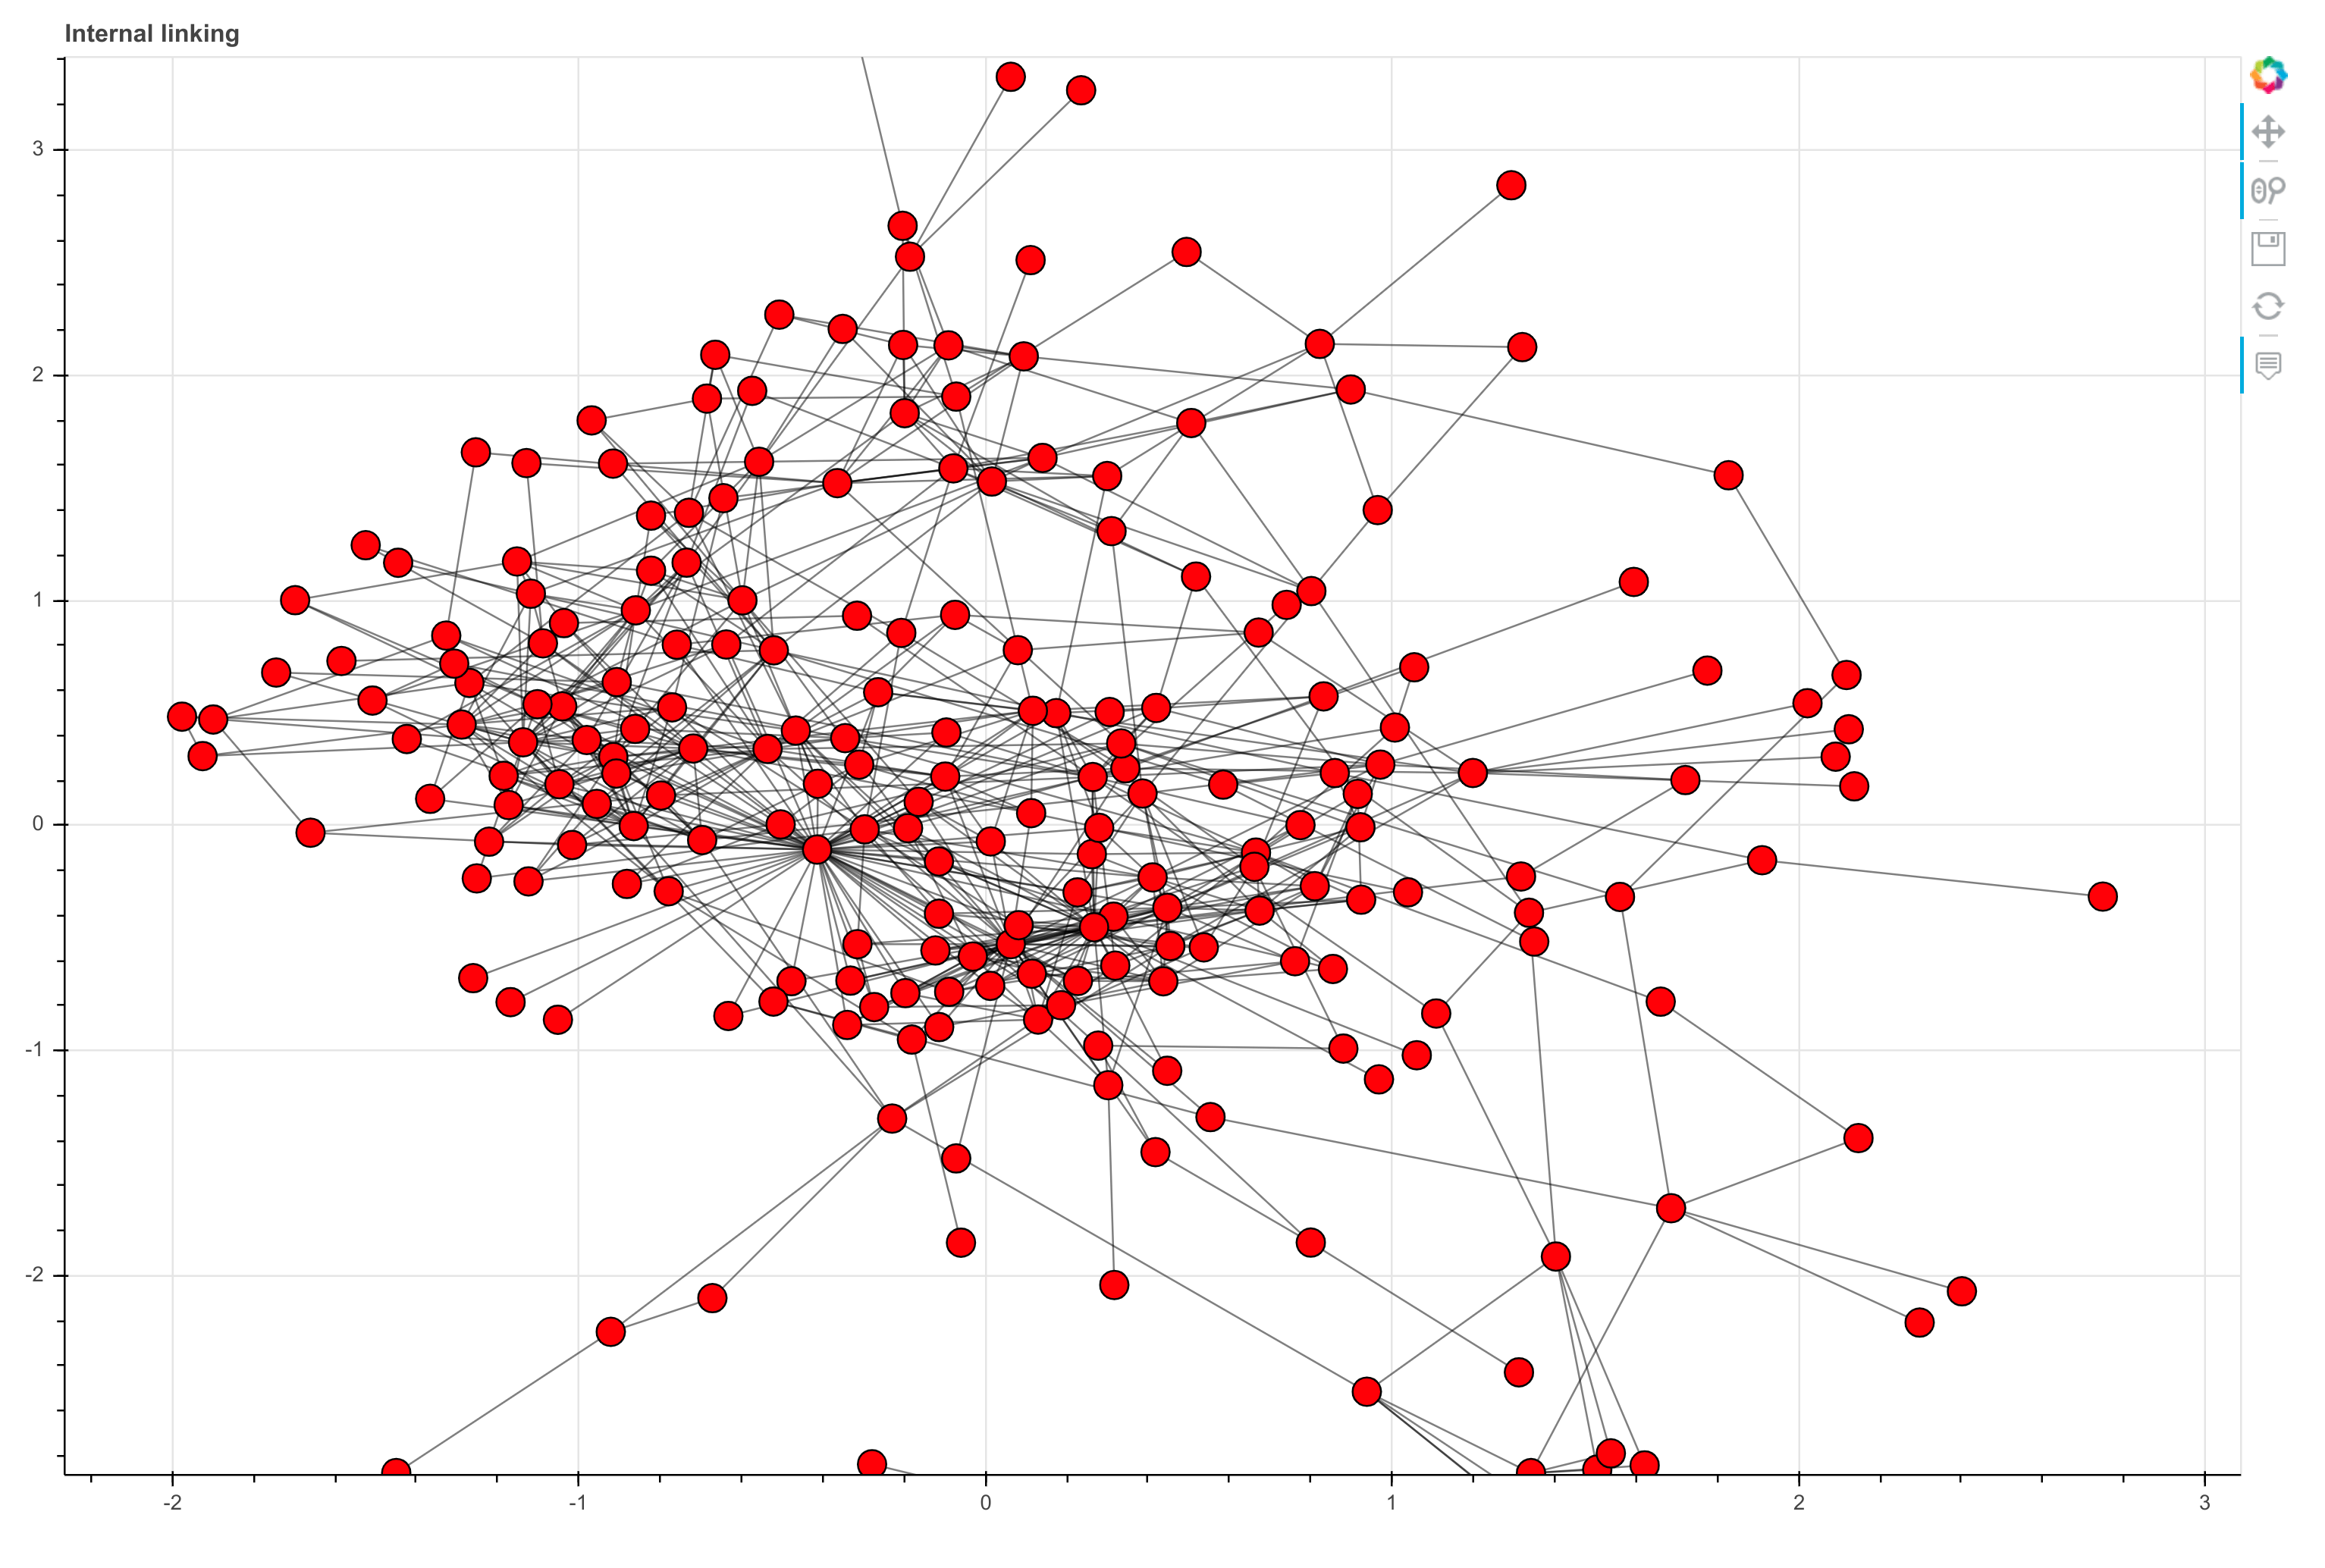 Network graph showing internal linking with Bokeh